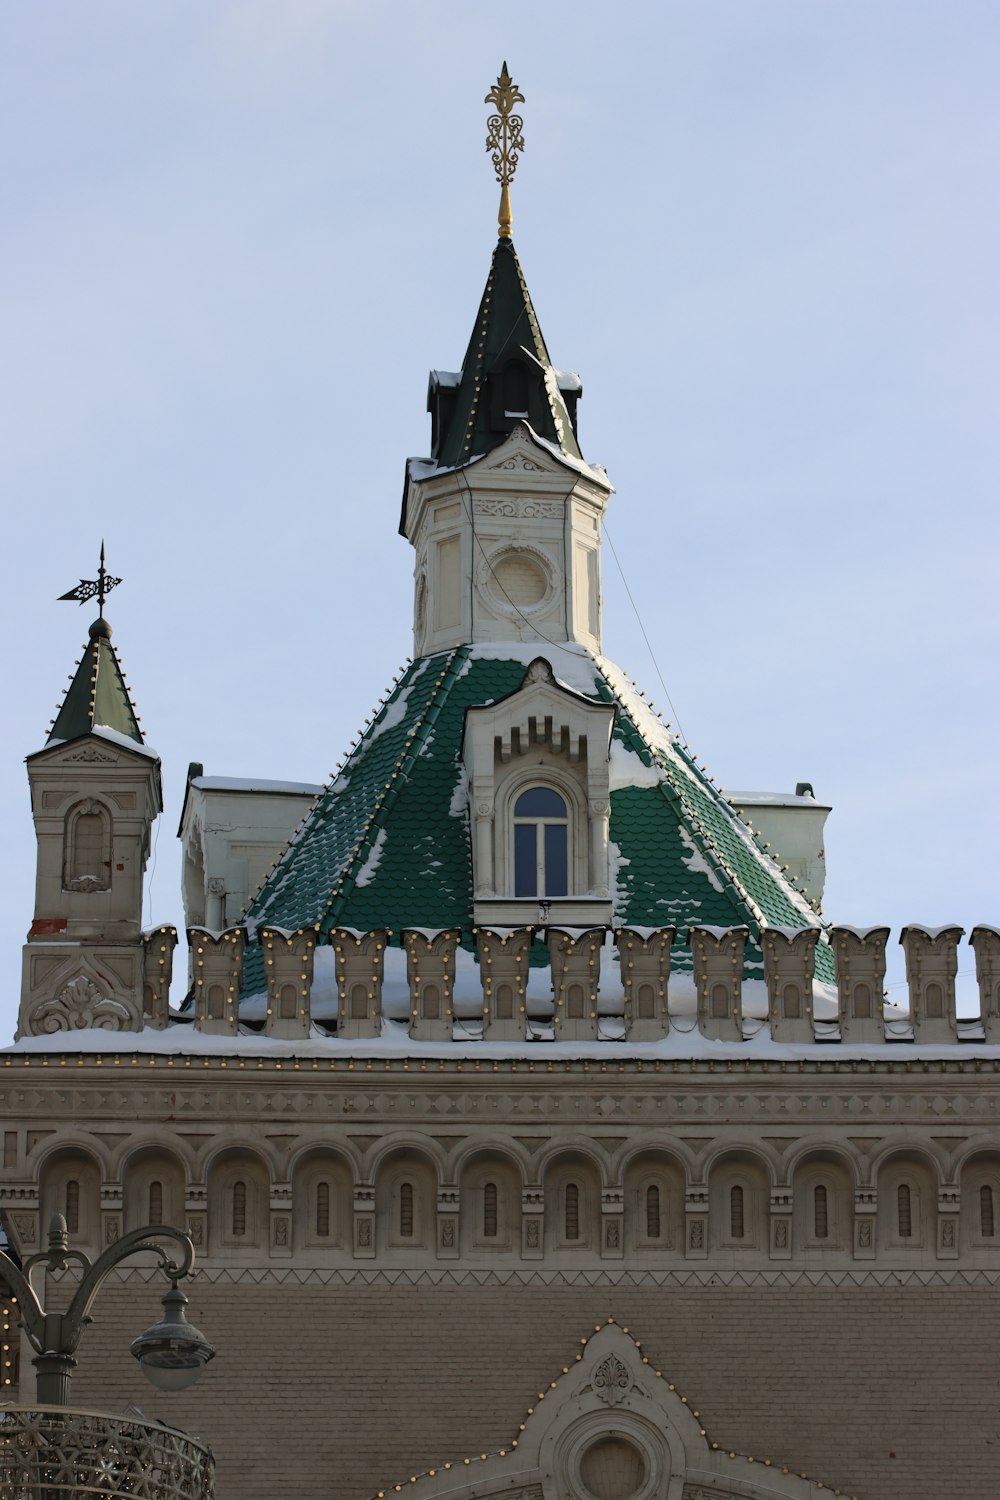 a large building with a green roof and a clock tower